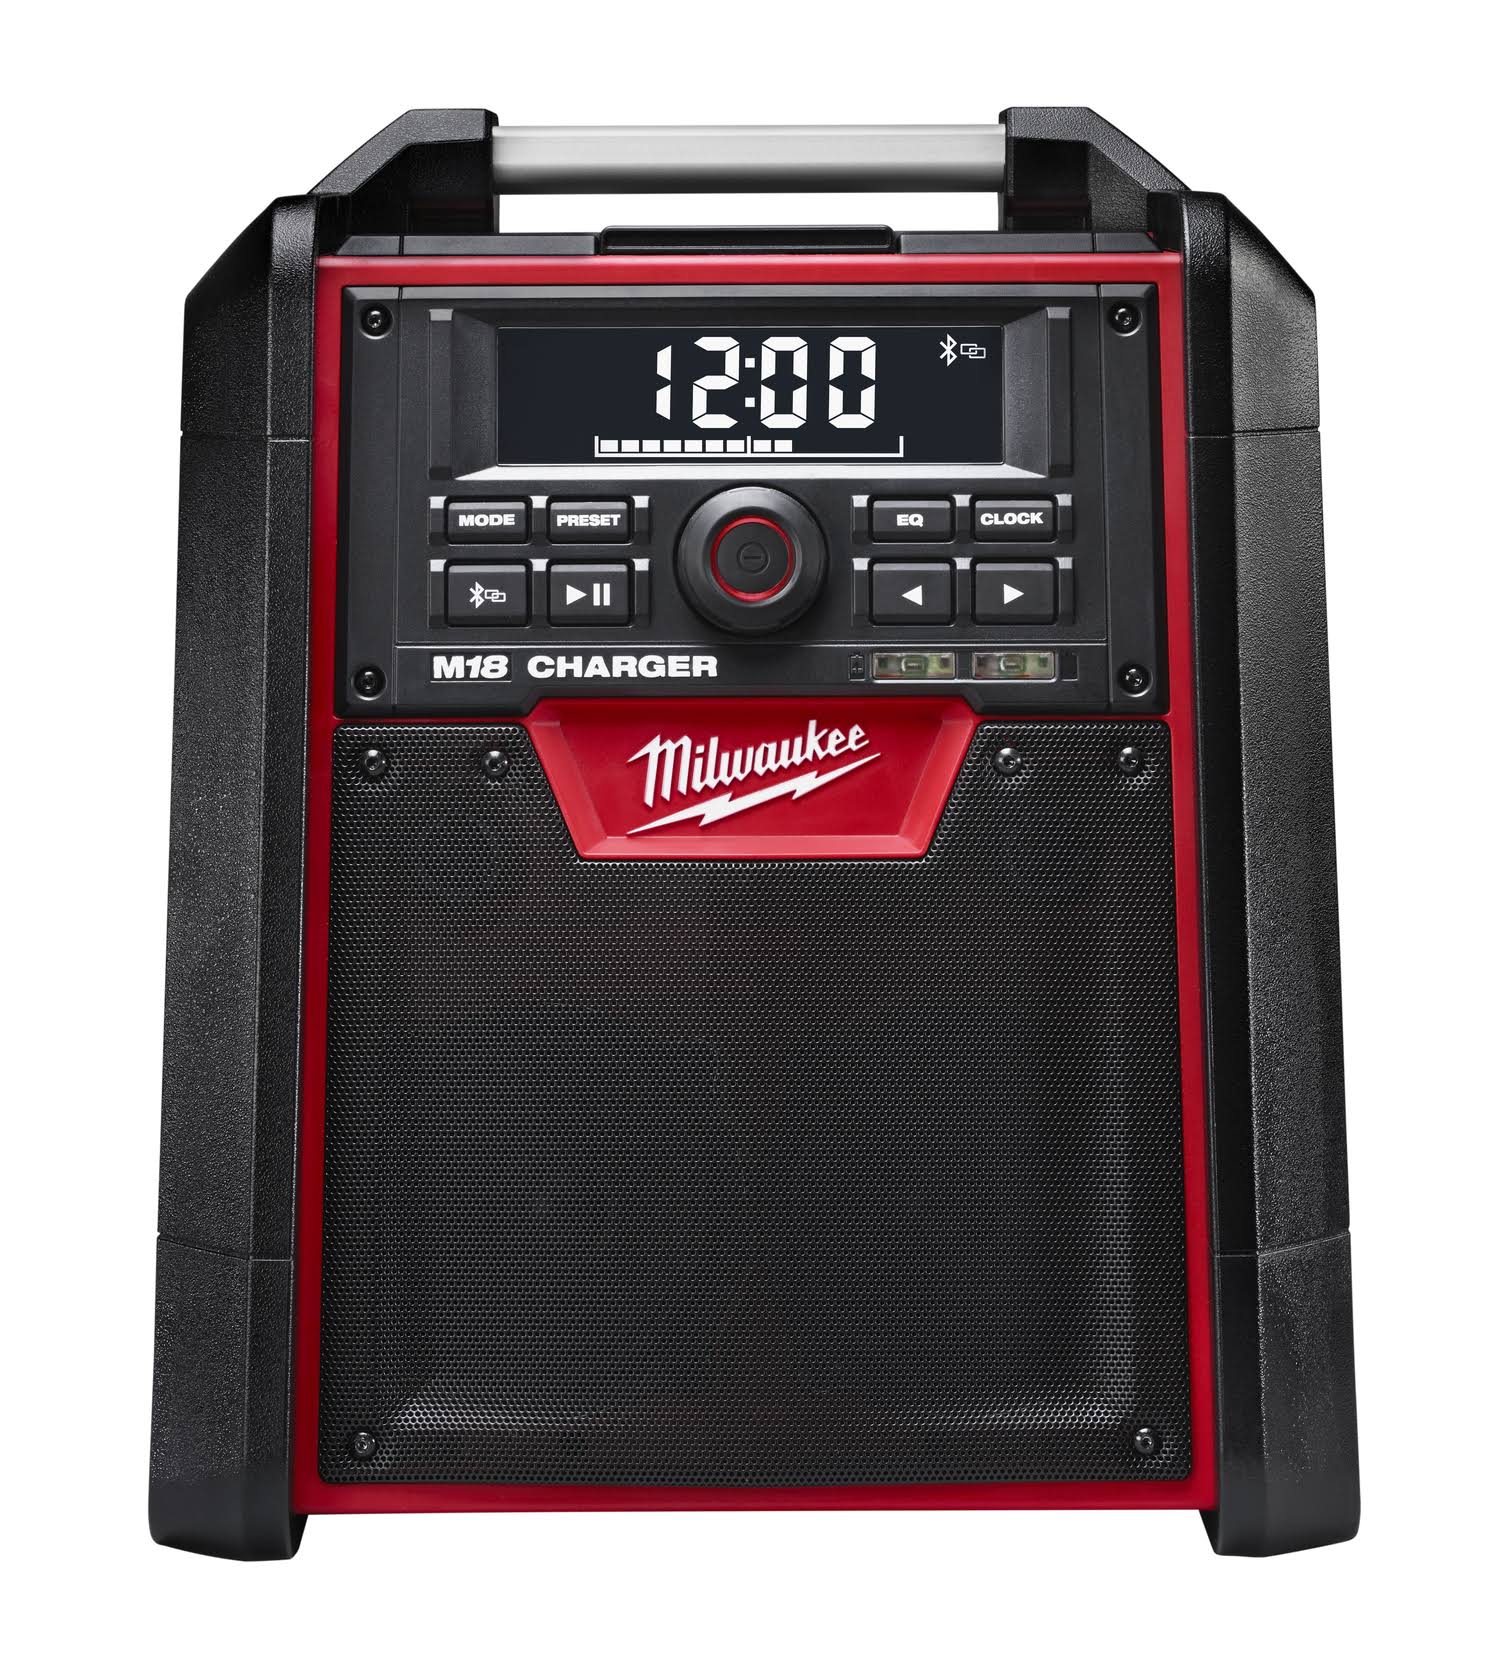 Milwaukee 279220 M18 Lithium Ion Cordless Jobsite Radio and Charger - 18V